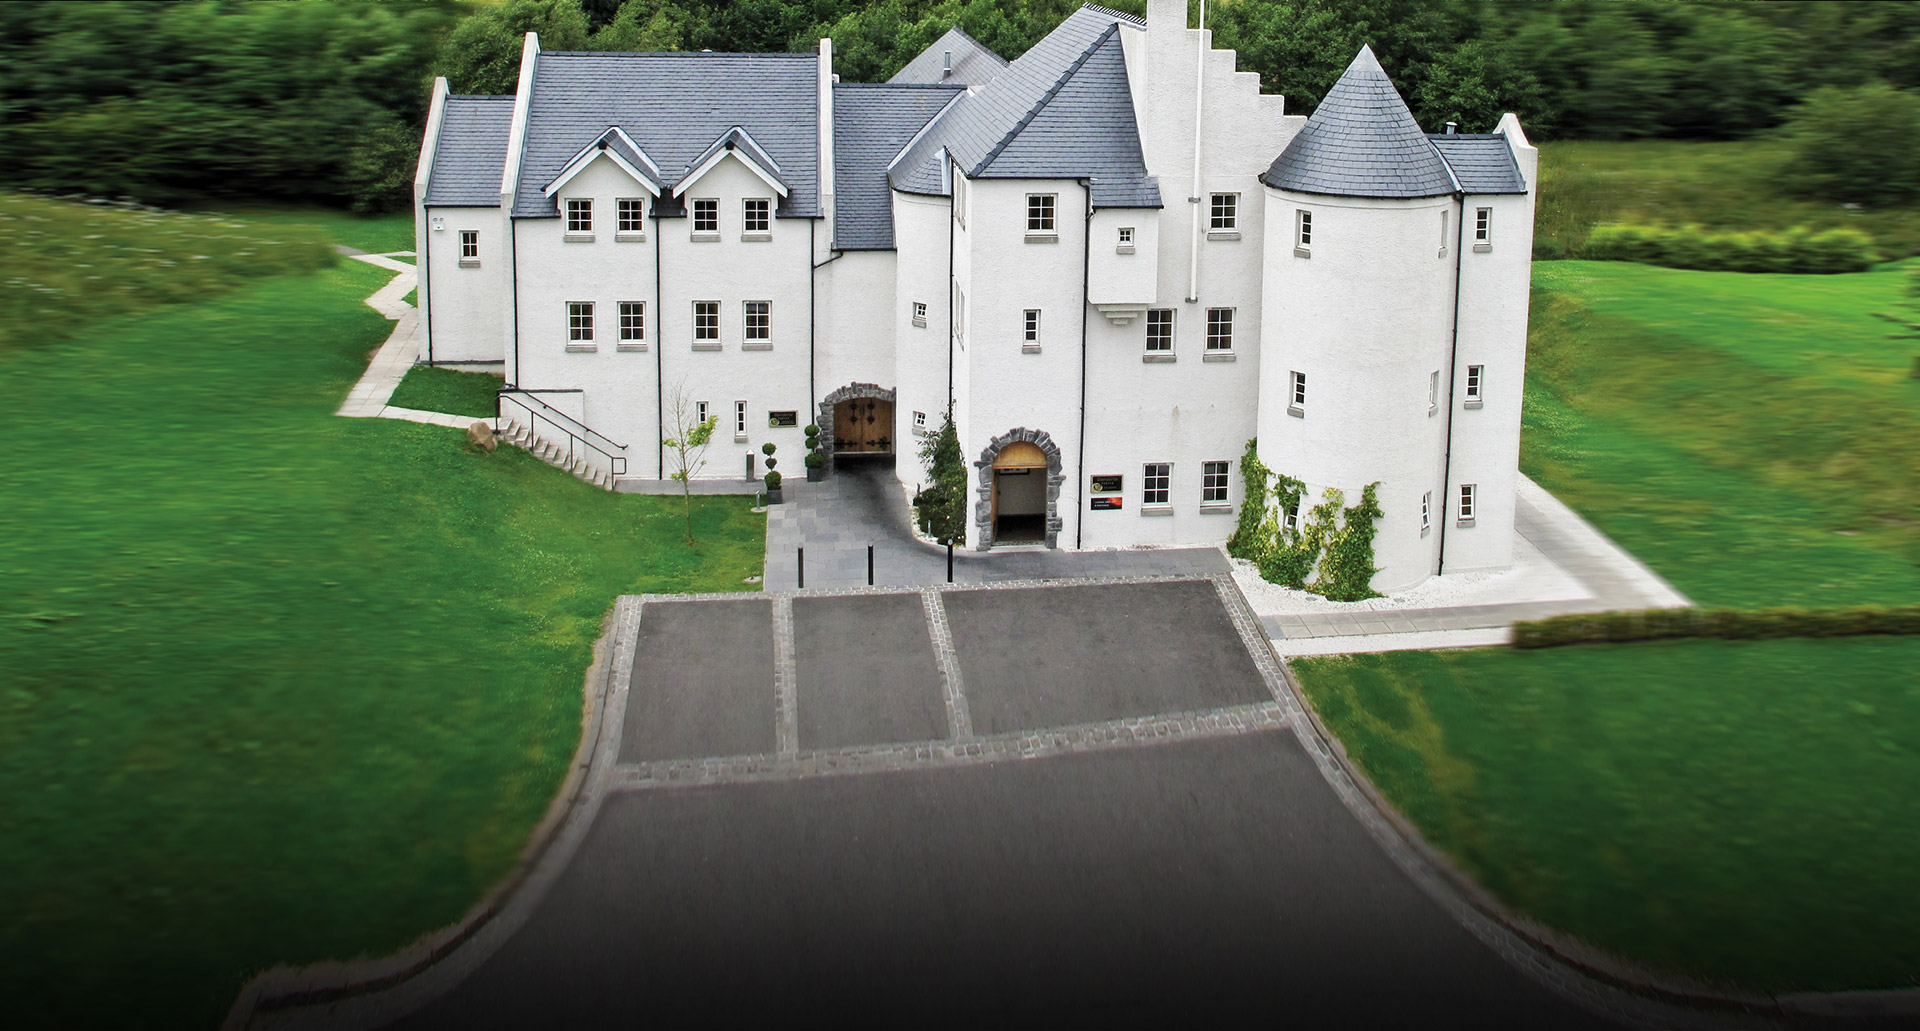 Khungha Investments acquires Skirlie Castle's business and assets out of administration